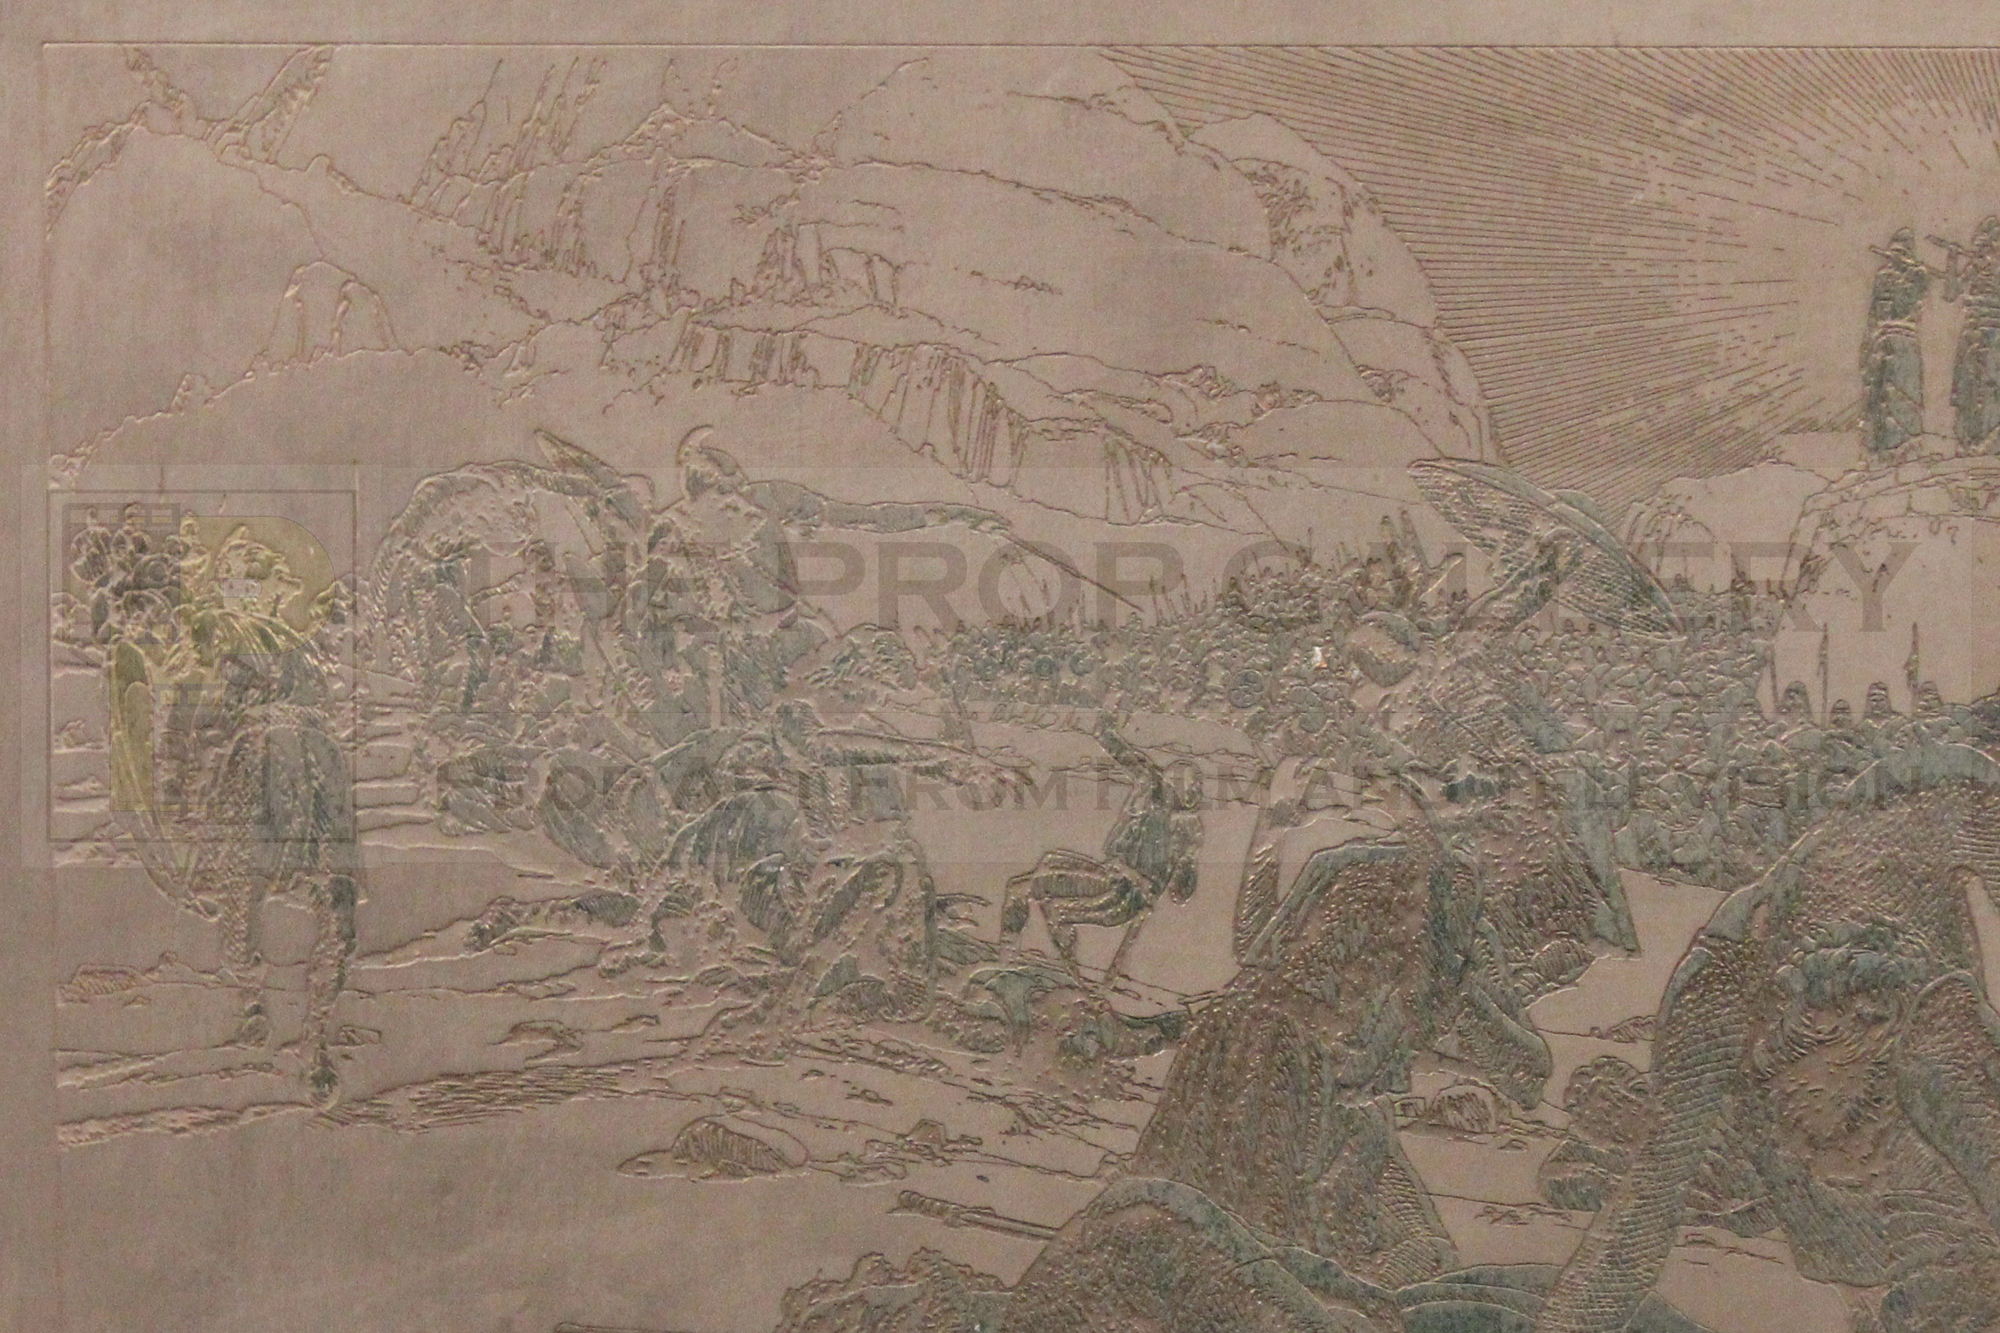 Original Ark of the Covenant etching created by Ralph McQuarrie during the production of Raiders of the Lost Ark.